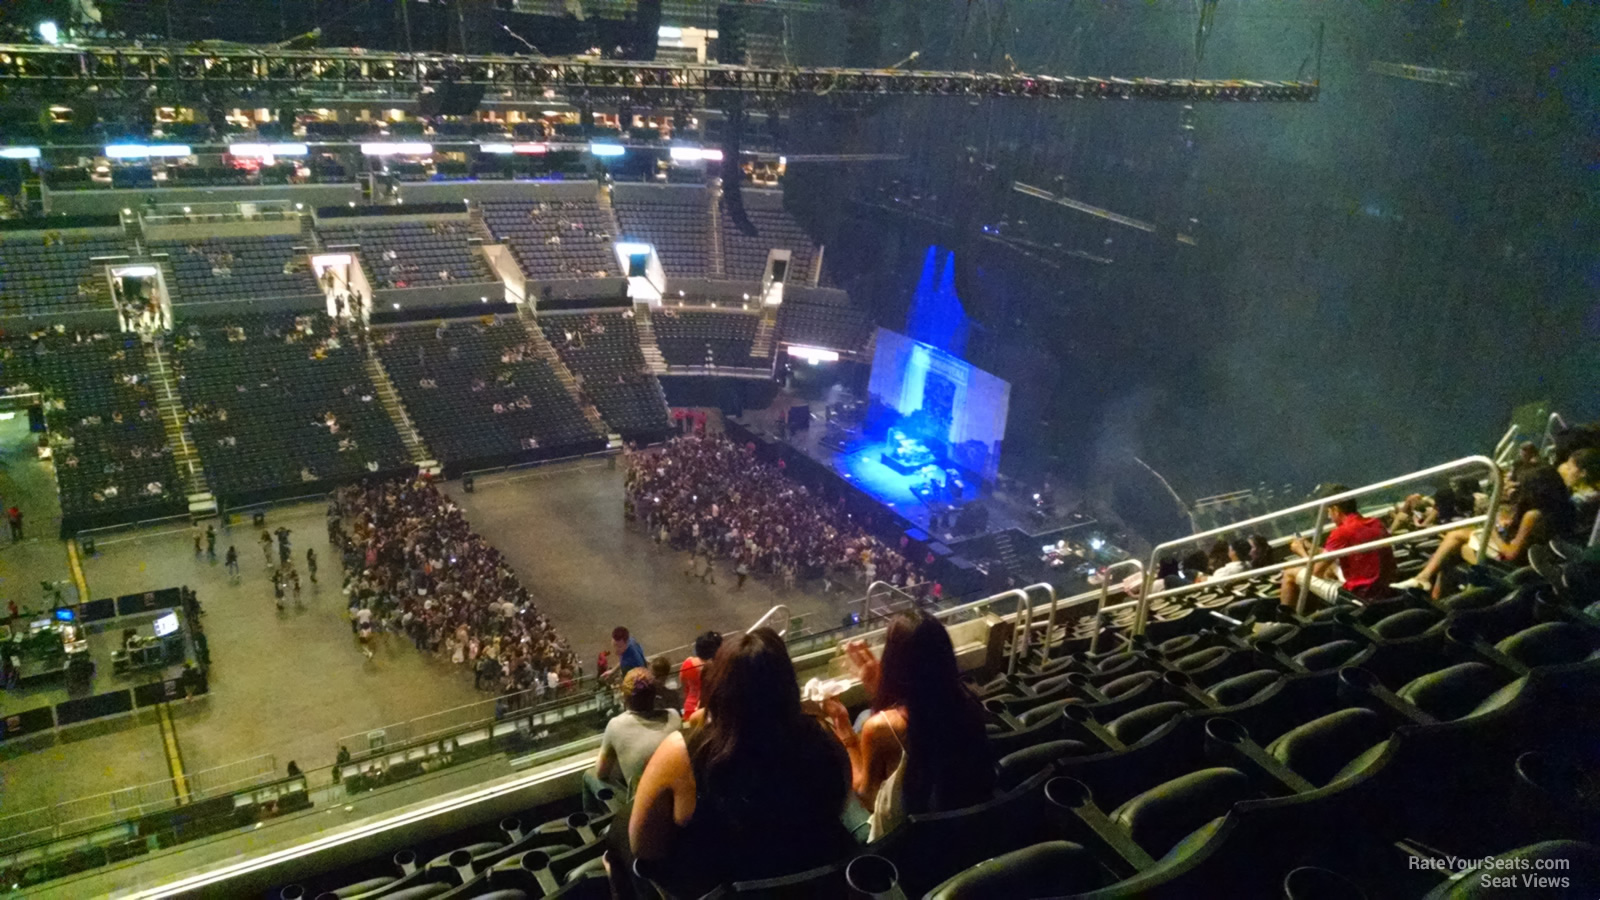 section 302, row 12 seat view  for concert - crypto.com arena